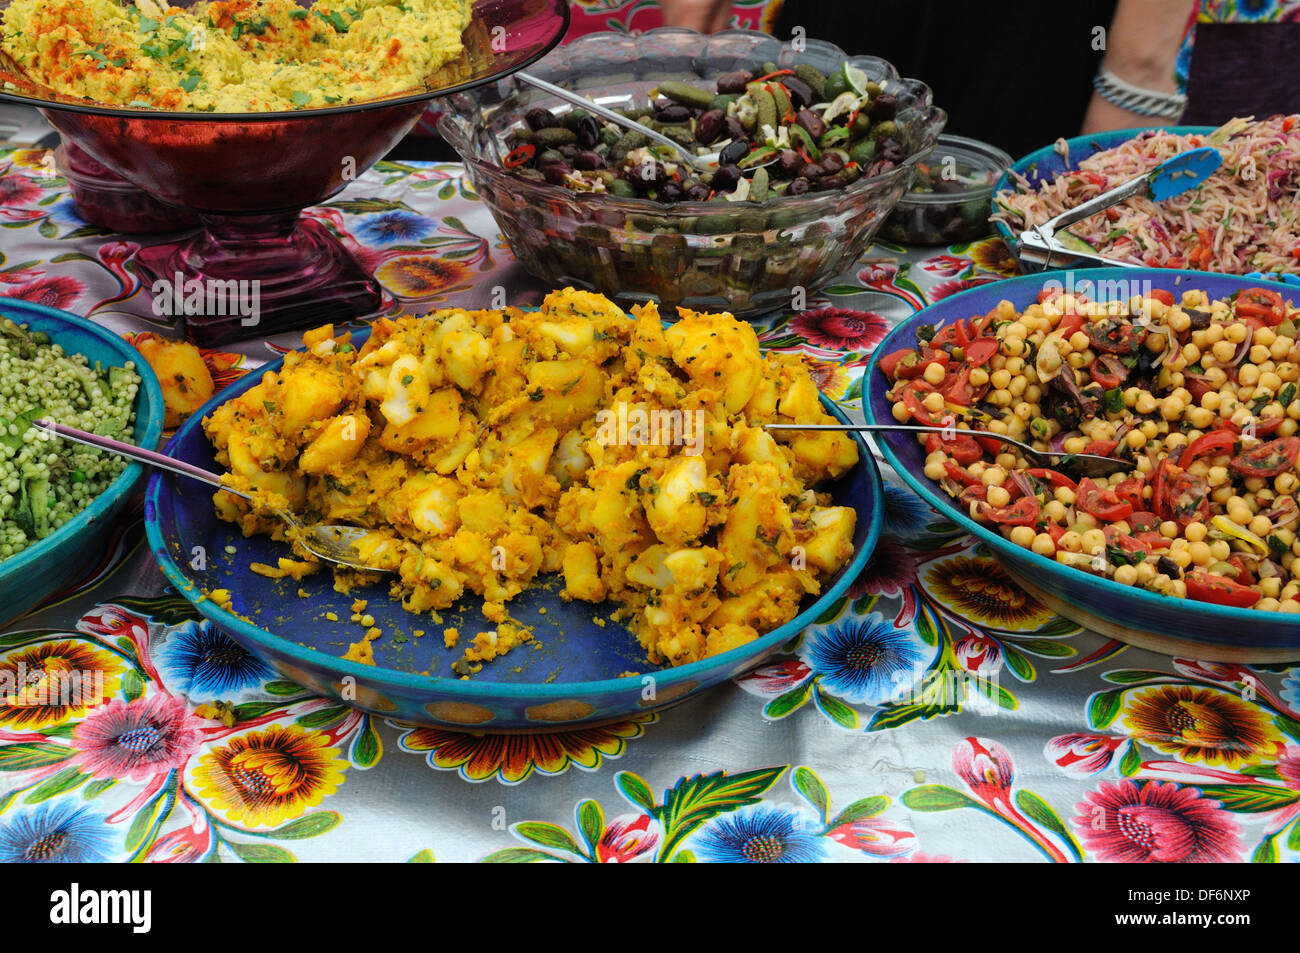 Vegetarian food served on a colourful cloth Stock Photo